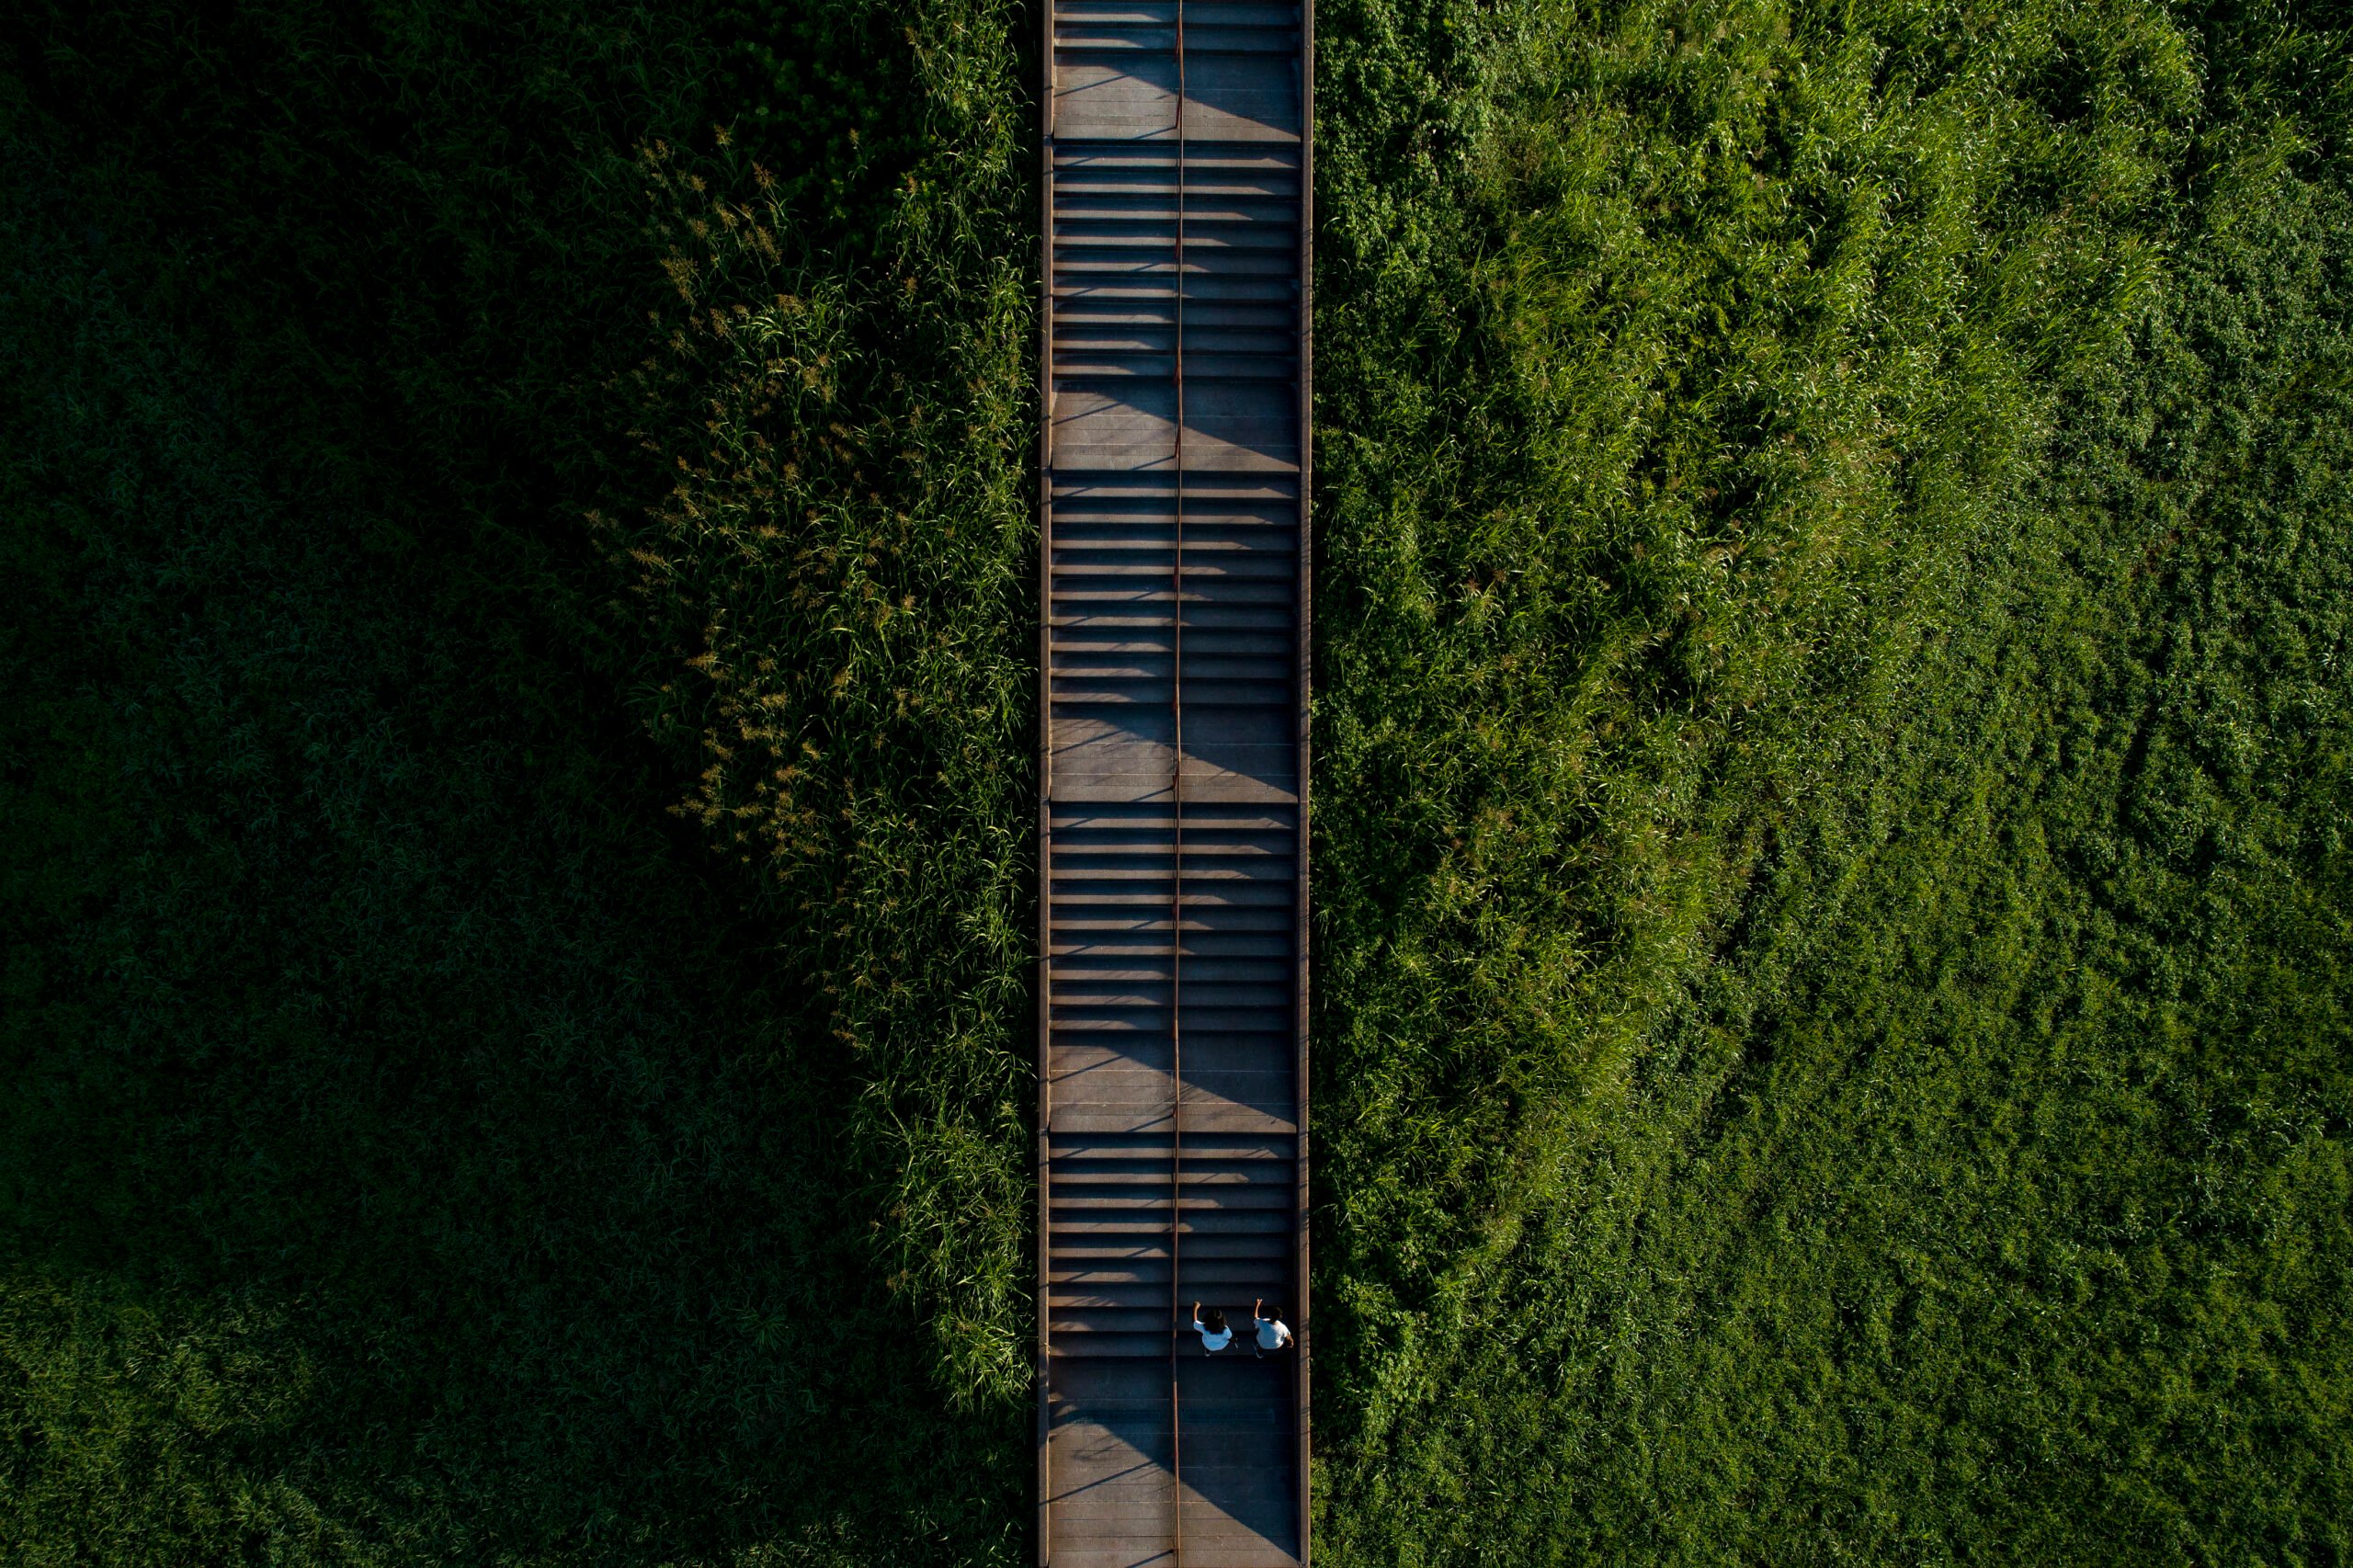 In this drone shot, Daniel Acker centers the sets of stairs leading to the top of Cahokia Mounds